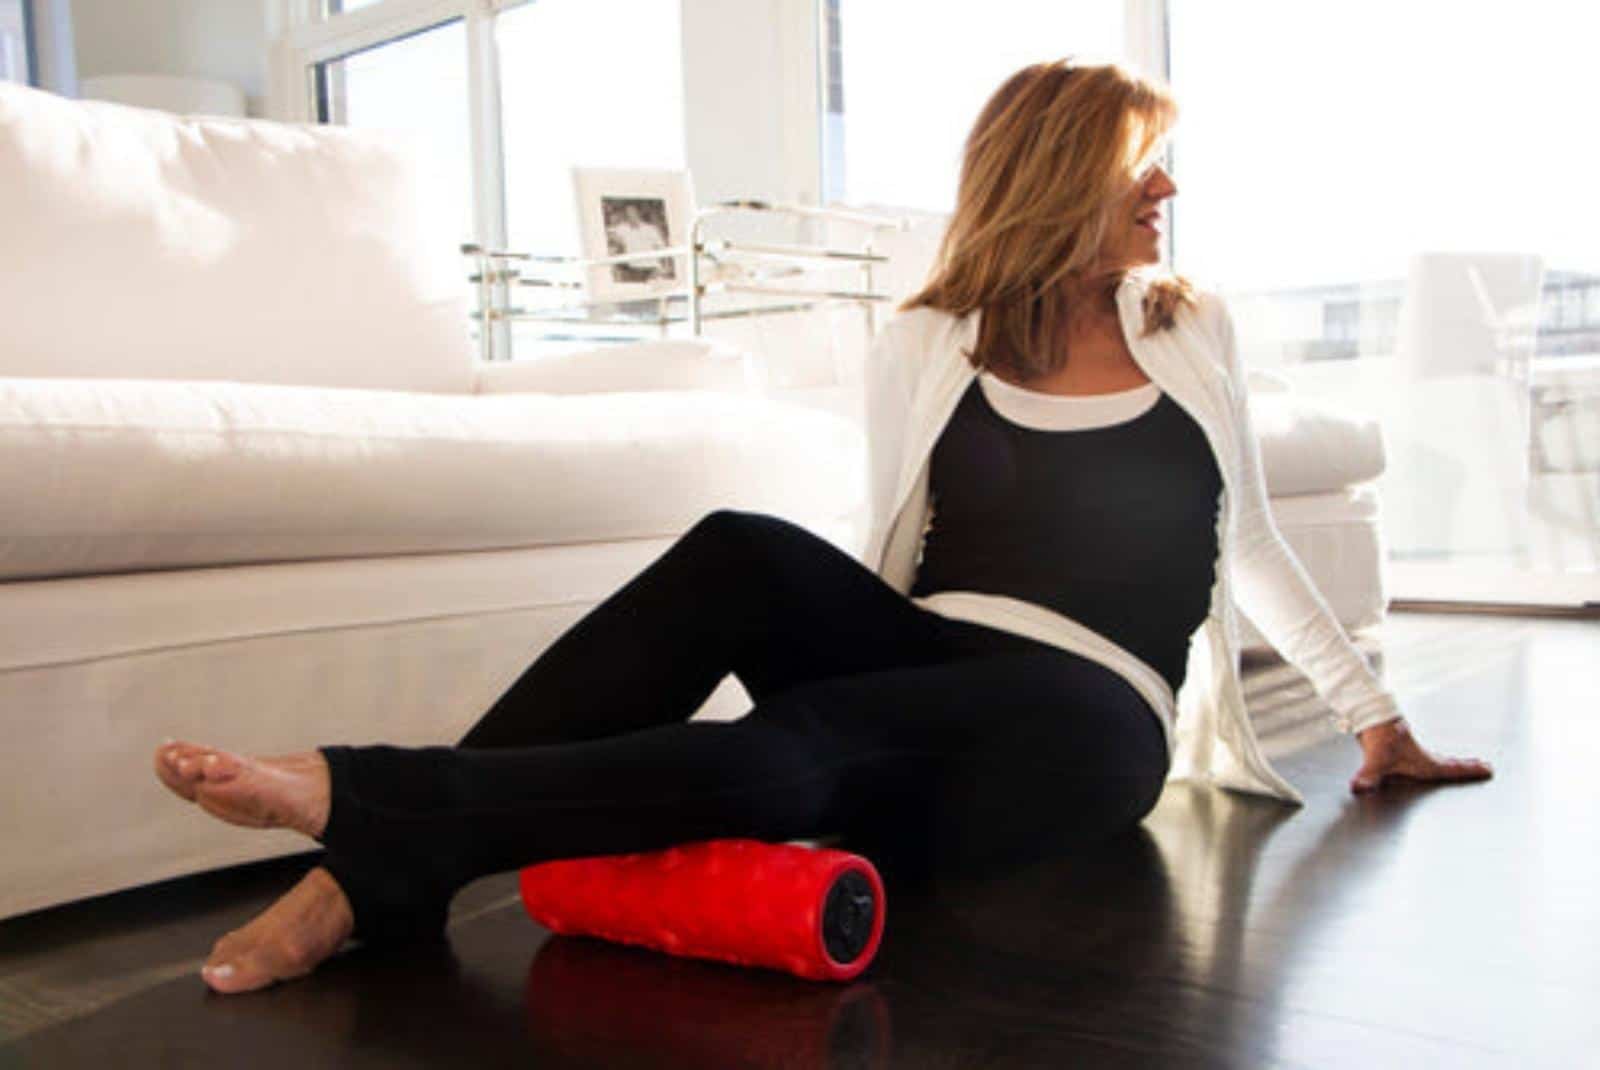 The power plate roller gives targeted vibration therapy to aching muscles.